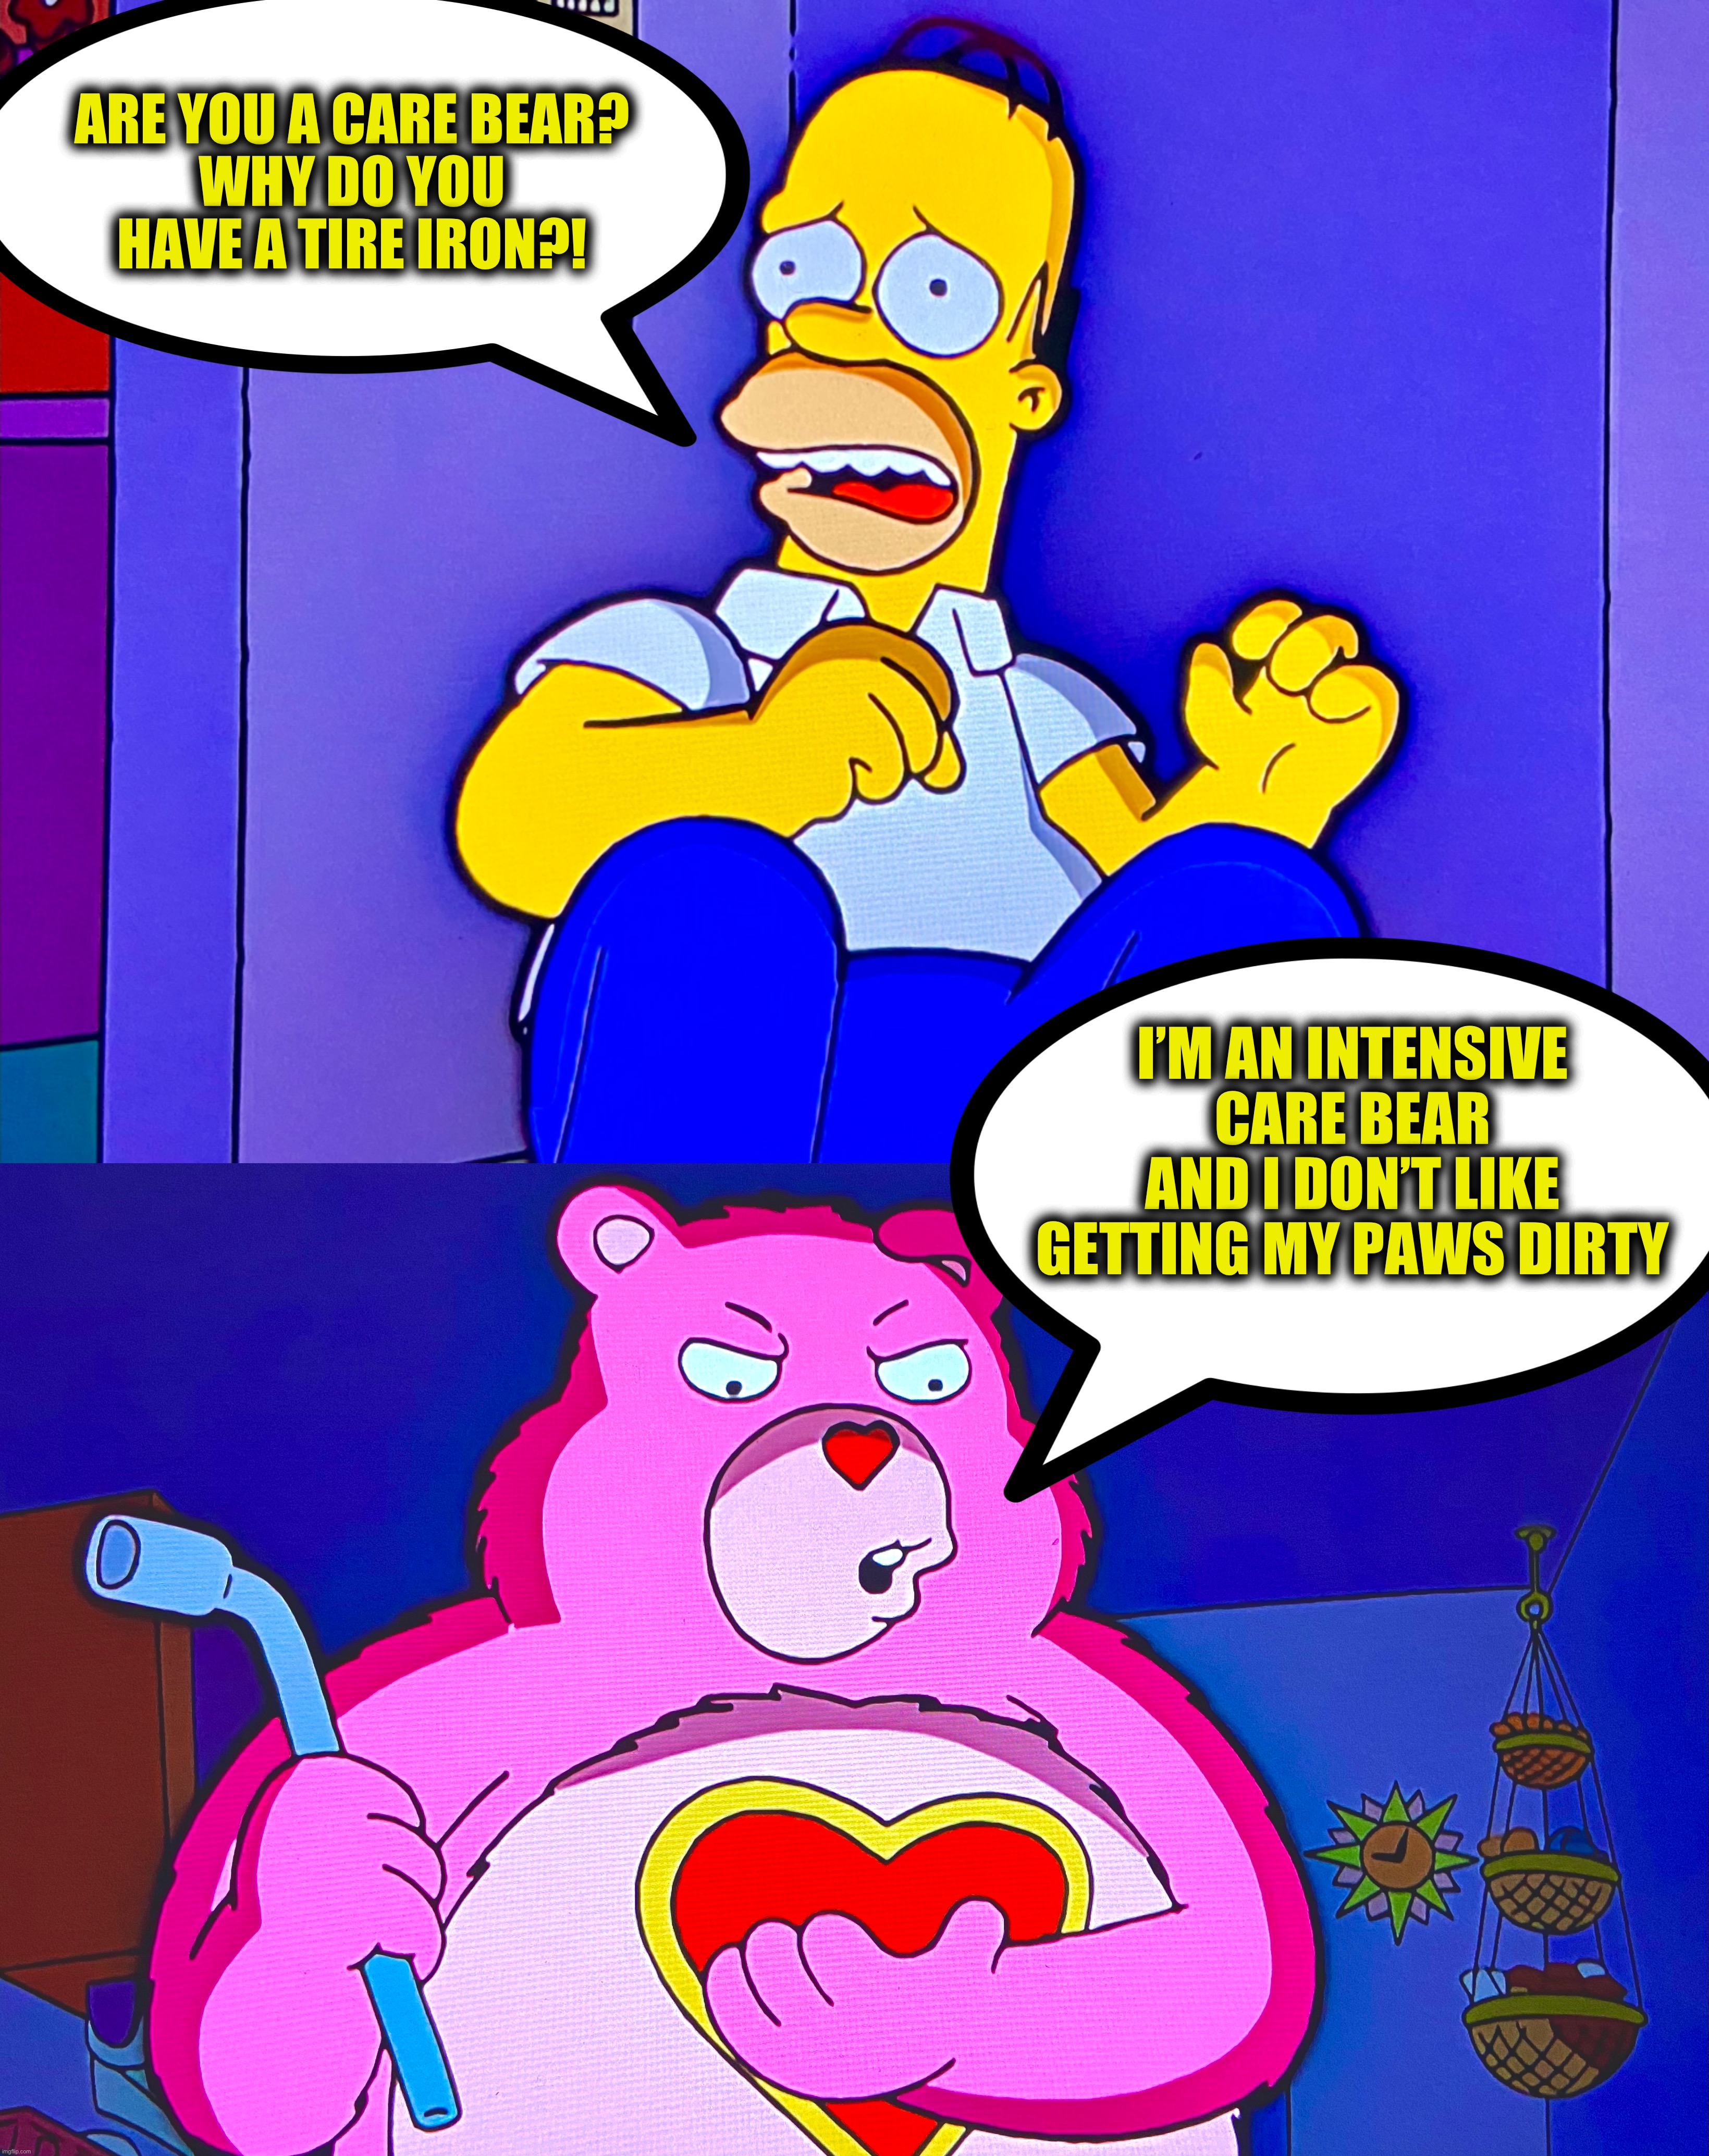 D’ohwhere to hide | ARE YOU A CARE BEAR?
WHY DO YOU HAVE A TIRE IRON?! I’M AN INTENSIVE CARE BEAR
AND I DON’T LIKE GETTING MY PAWS DIRTY | image tagged in the simpsons,care bear,nightmare,bears,memes,funny | made w/ Imgflip meme maker